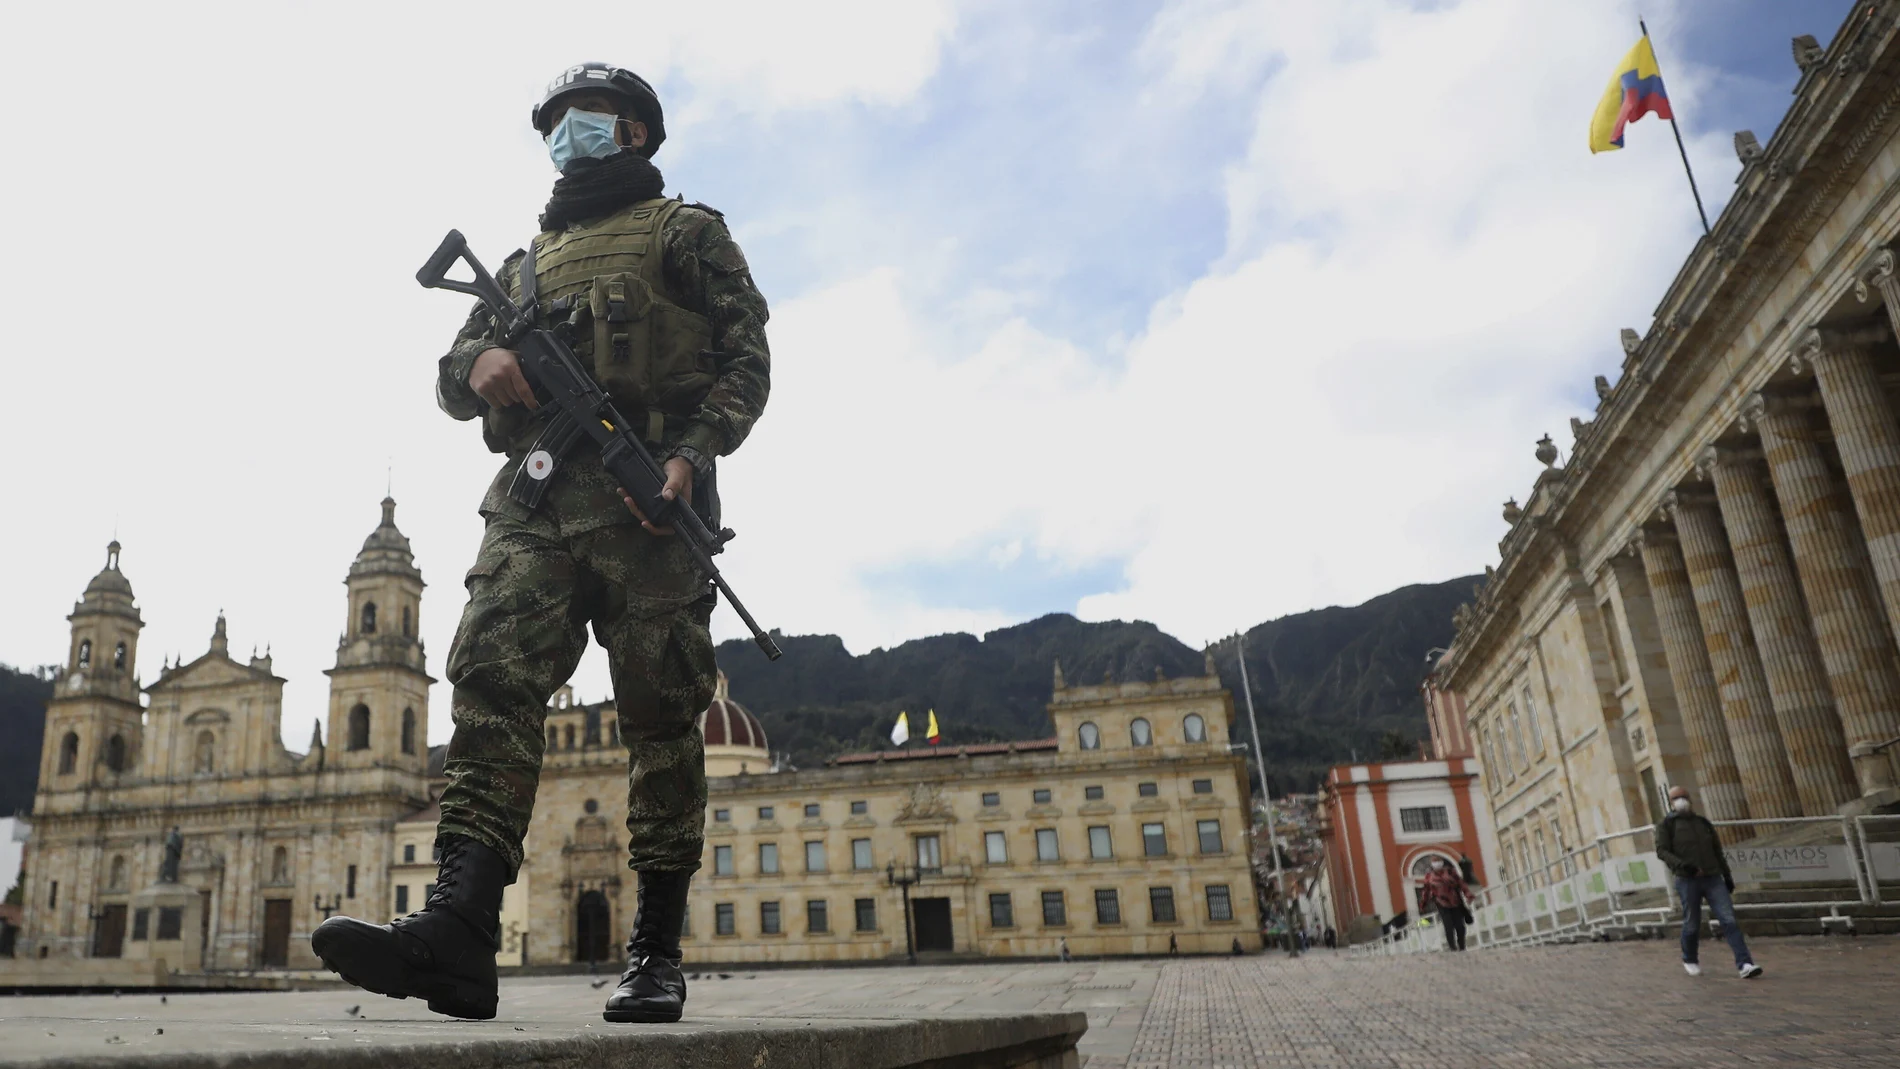 A soldier wearing a protective face mask walks in Bolivar Square in Bogota, Colombia, Tuesday, July 21, 2020, amid the new coronavirus pandemic. (AP Photo/Fernando Vergara)